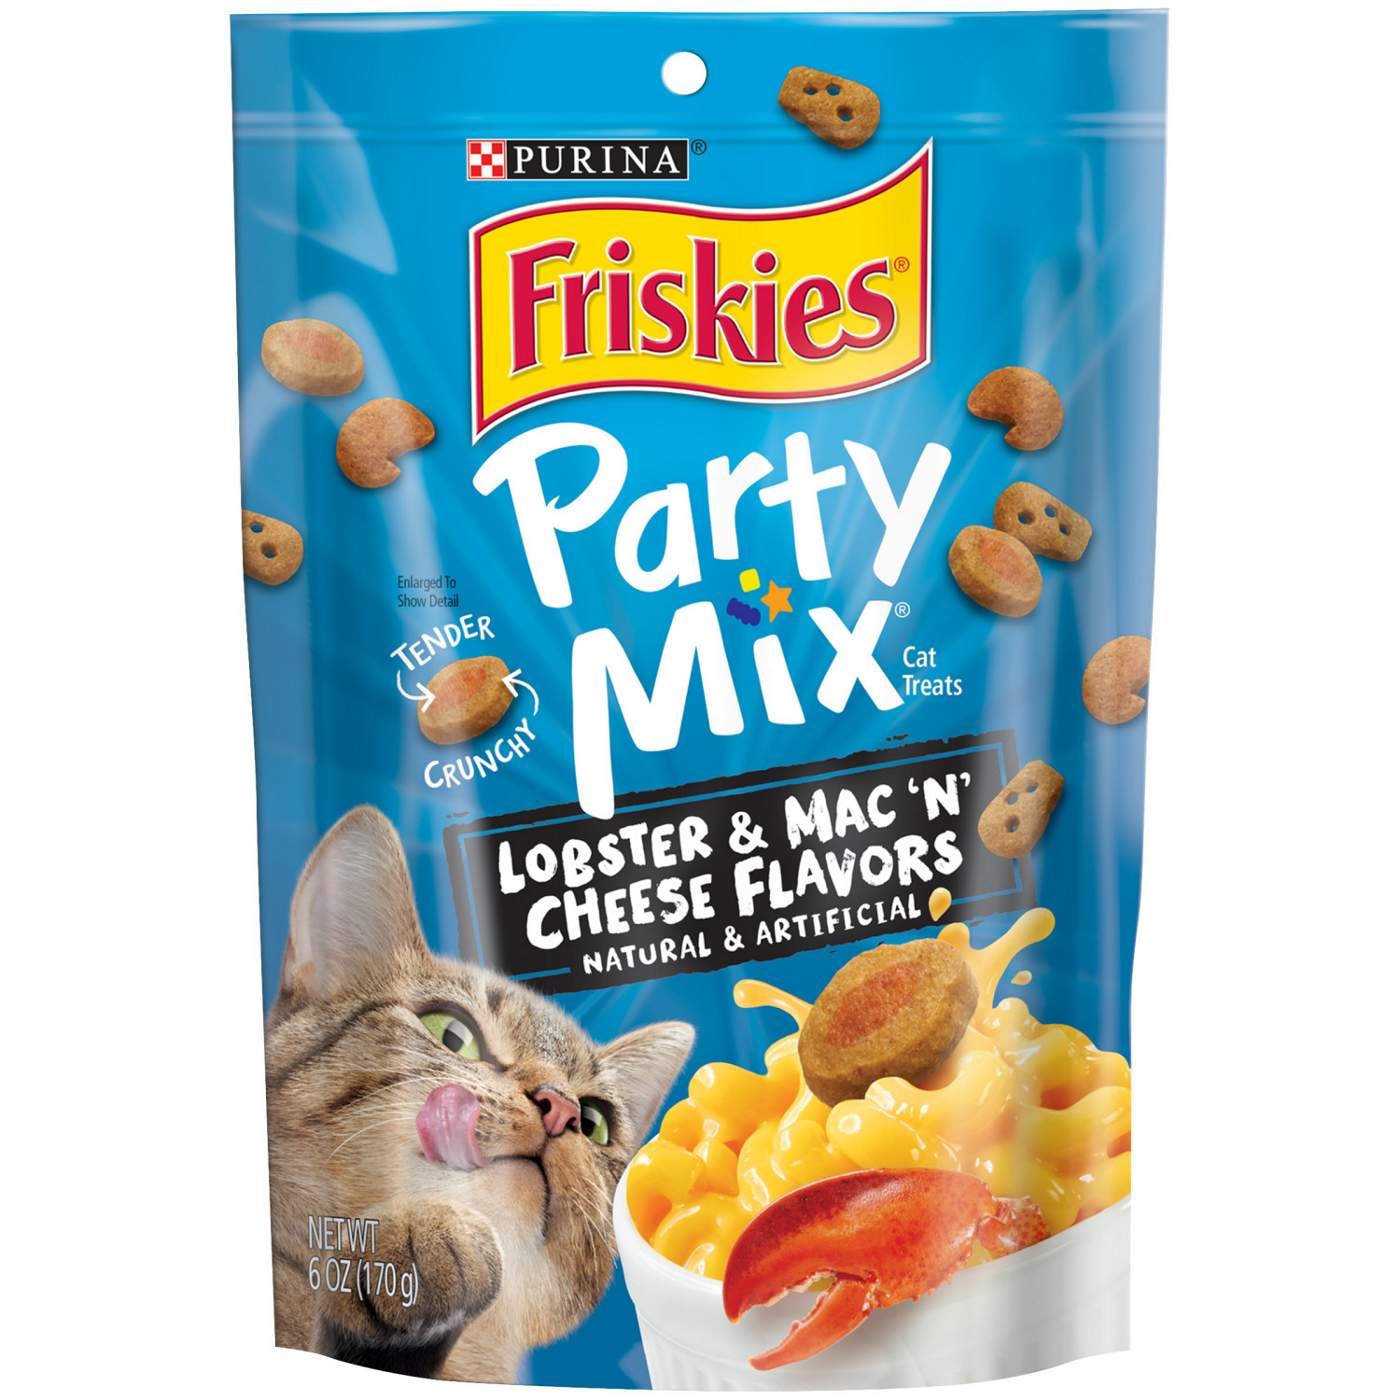 Friskies Purina Friskies Made in USA Facilities Cat Treats, Party Mix Lobster & Mac 'N' Cheese Flavors; image 1 of 8